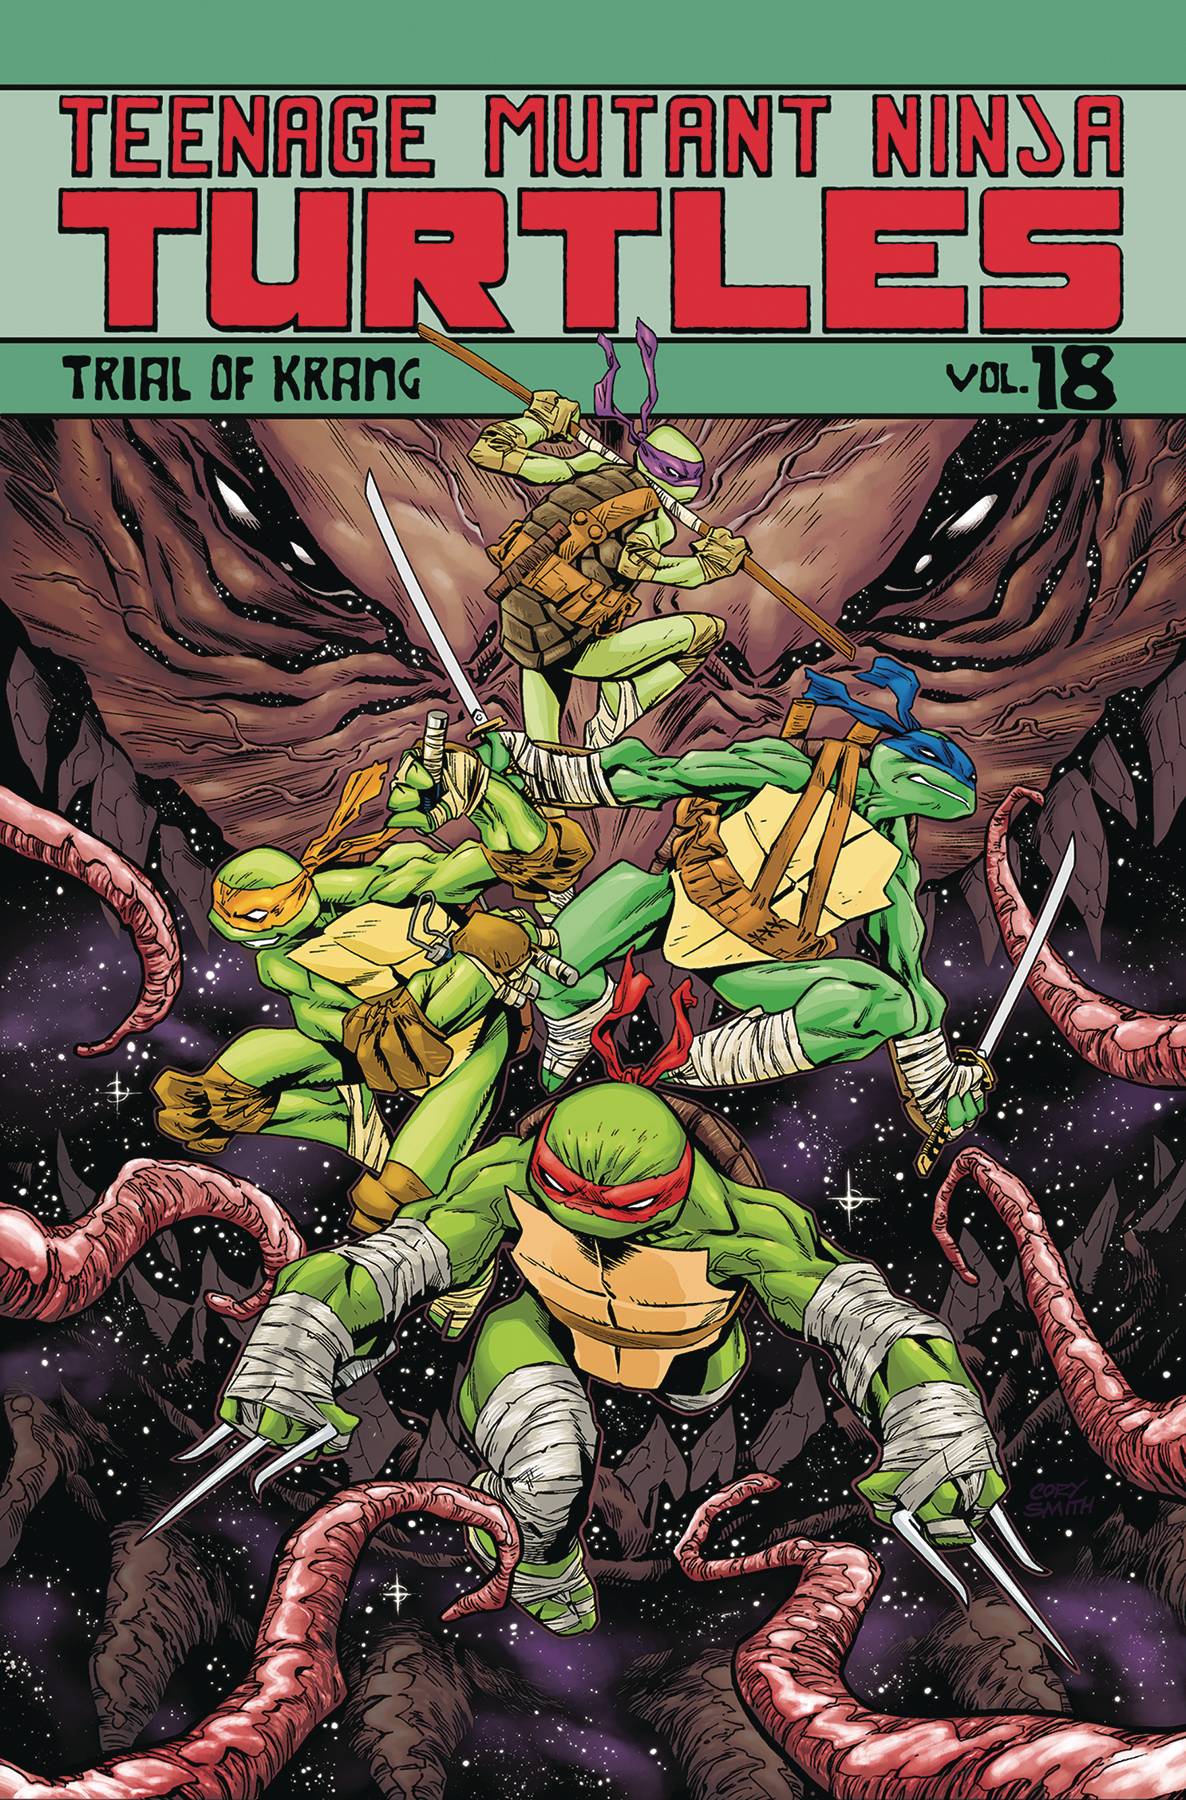 TMNT ONGOING TP VOL 18 TRIAL OF KRANG